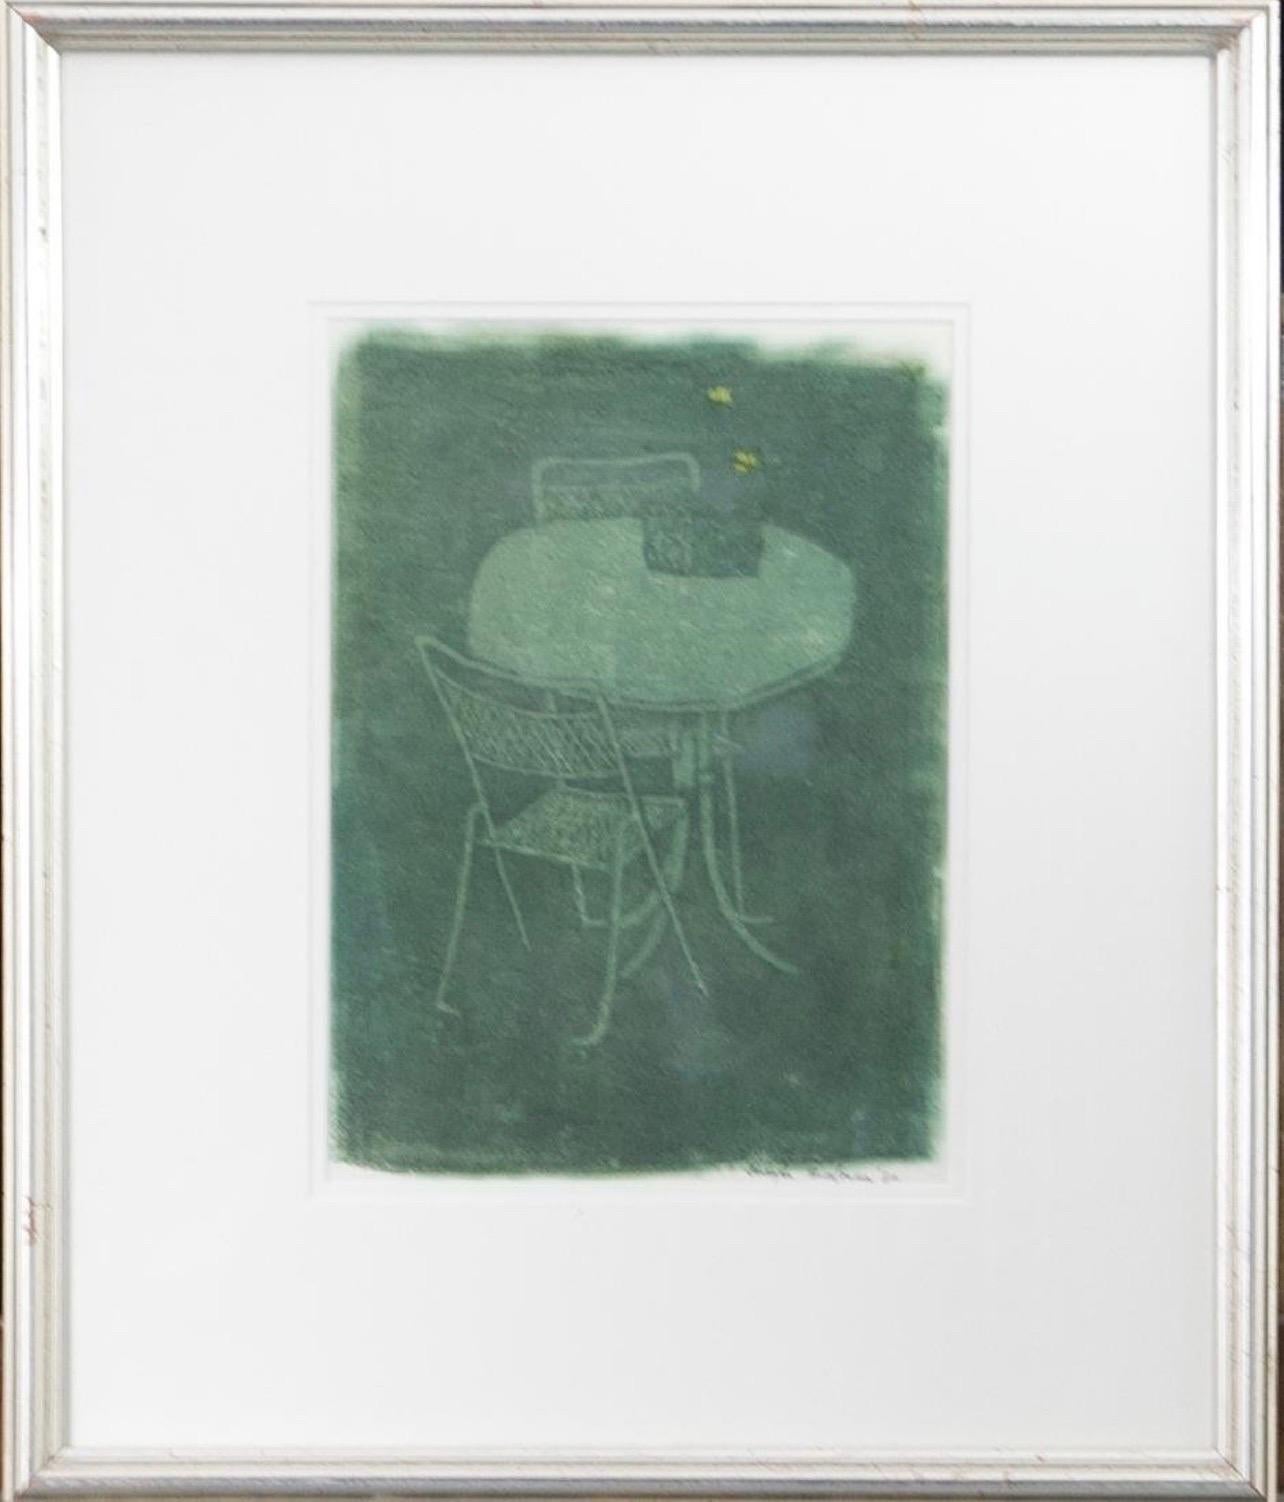 
Monotype Painting Title: Table and Chairs, 1980
Medium:  monotype or monoprint painting
Size: image 13 x 9.5,overall with frame 23 x 20 
Hand signed and dated lower right
Provenance: Mercury Gallery, Boston MA

Joseph Solman (January 25, 1909 –